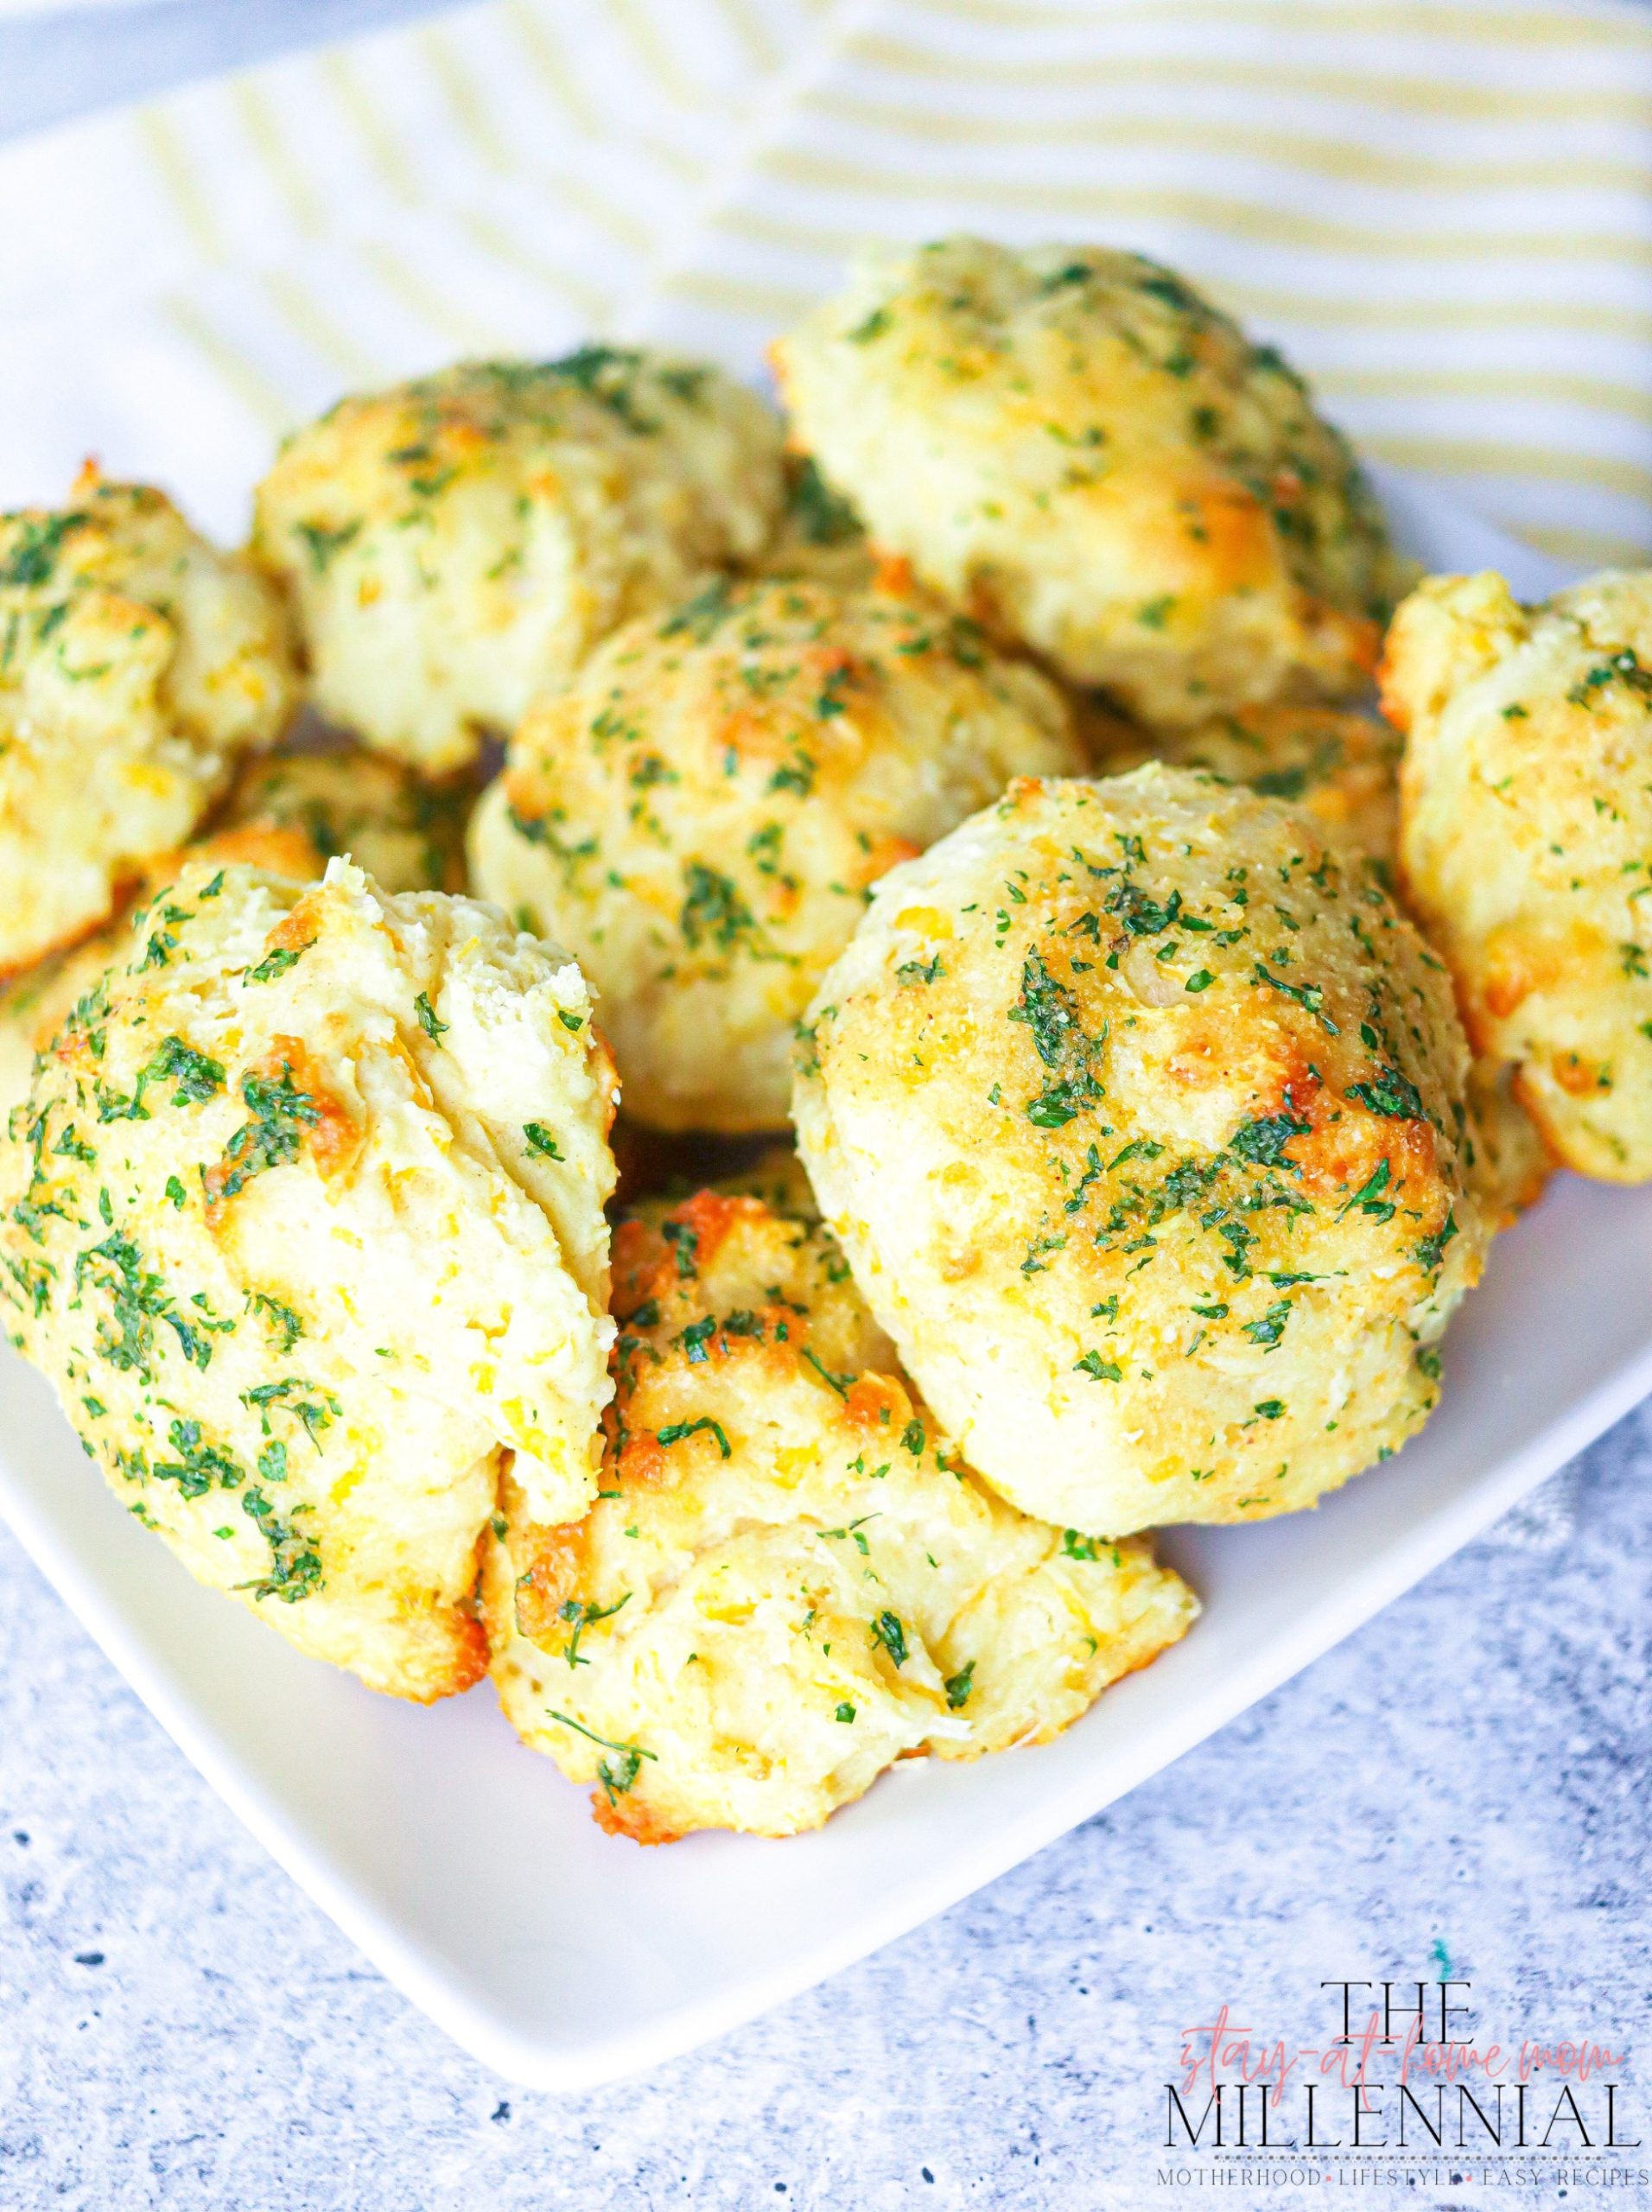 This easy Cheddar Bay Biscuits Recipe is made with two kinds of cheeses and easily comes together in only 30 minutes.